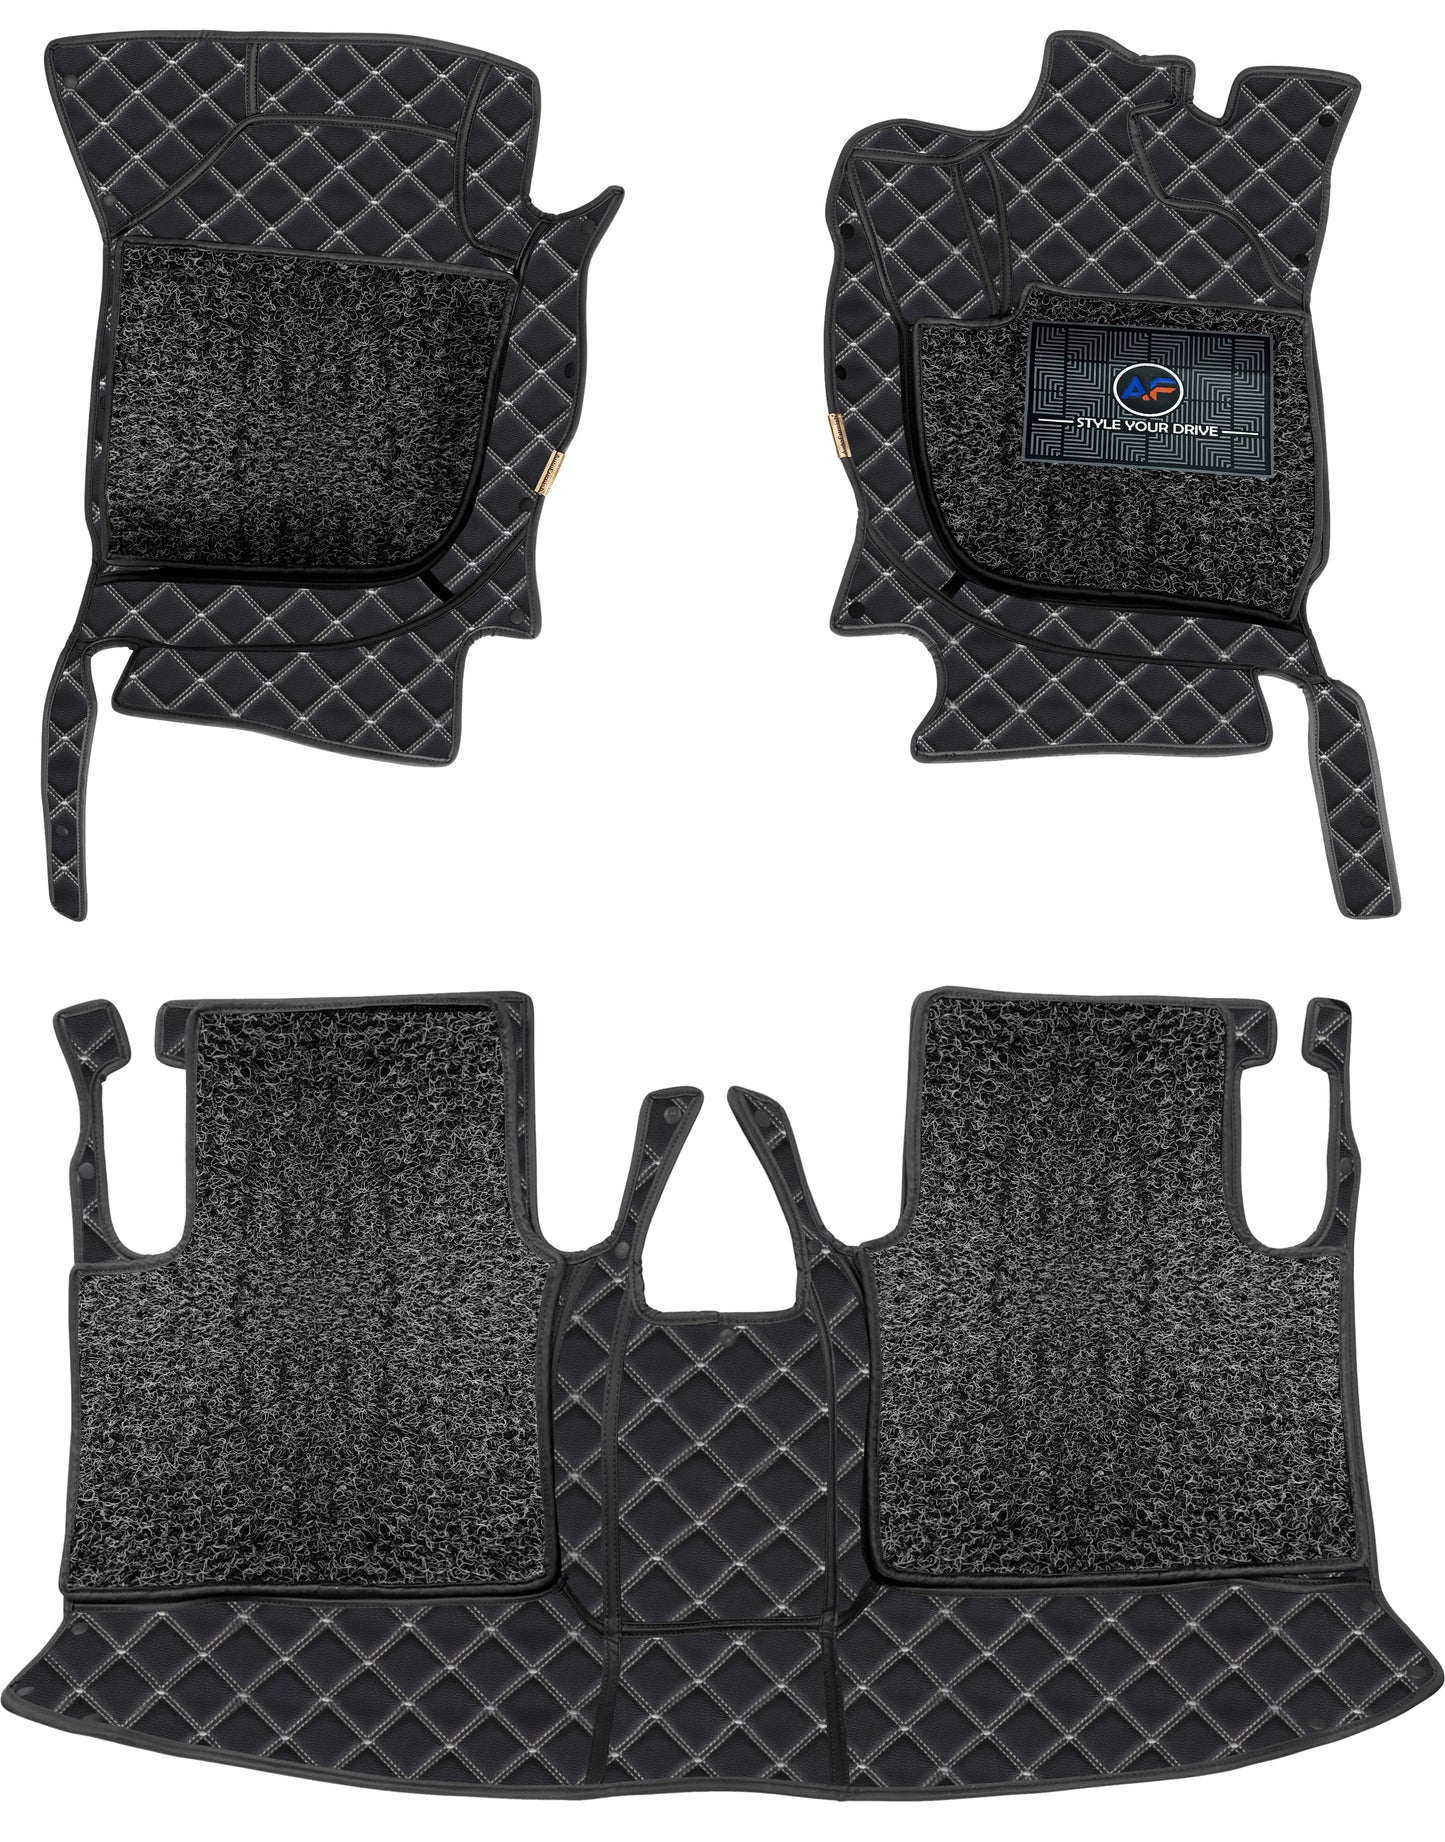 Porsche Macan 2019 7D Luxury Car Mat, All Weather Proof, Anti-Skid, 100% Waterproof & Odorless with Unique Diamond Fish Design (24mm Luxury PU Leather, 2 Rows)